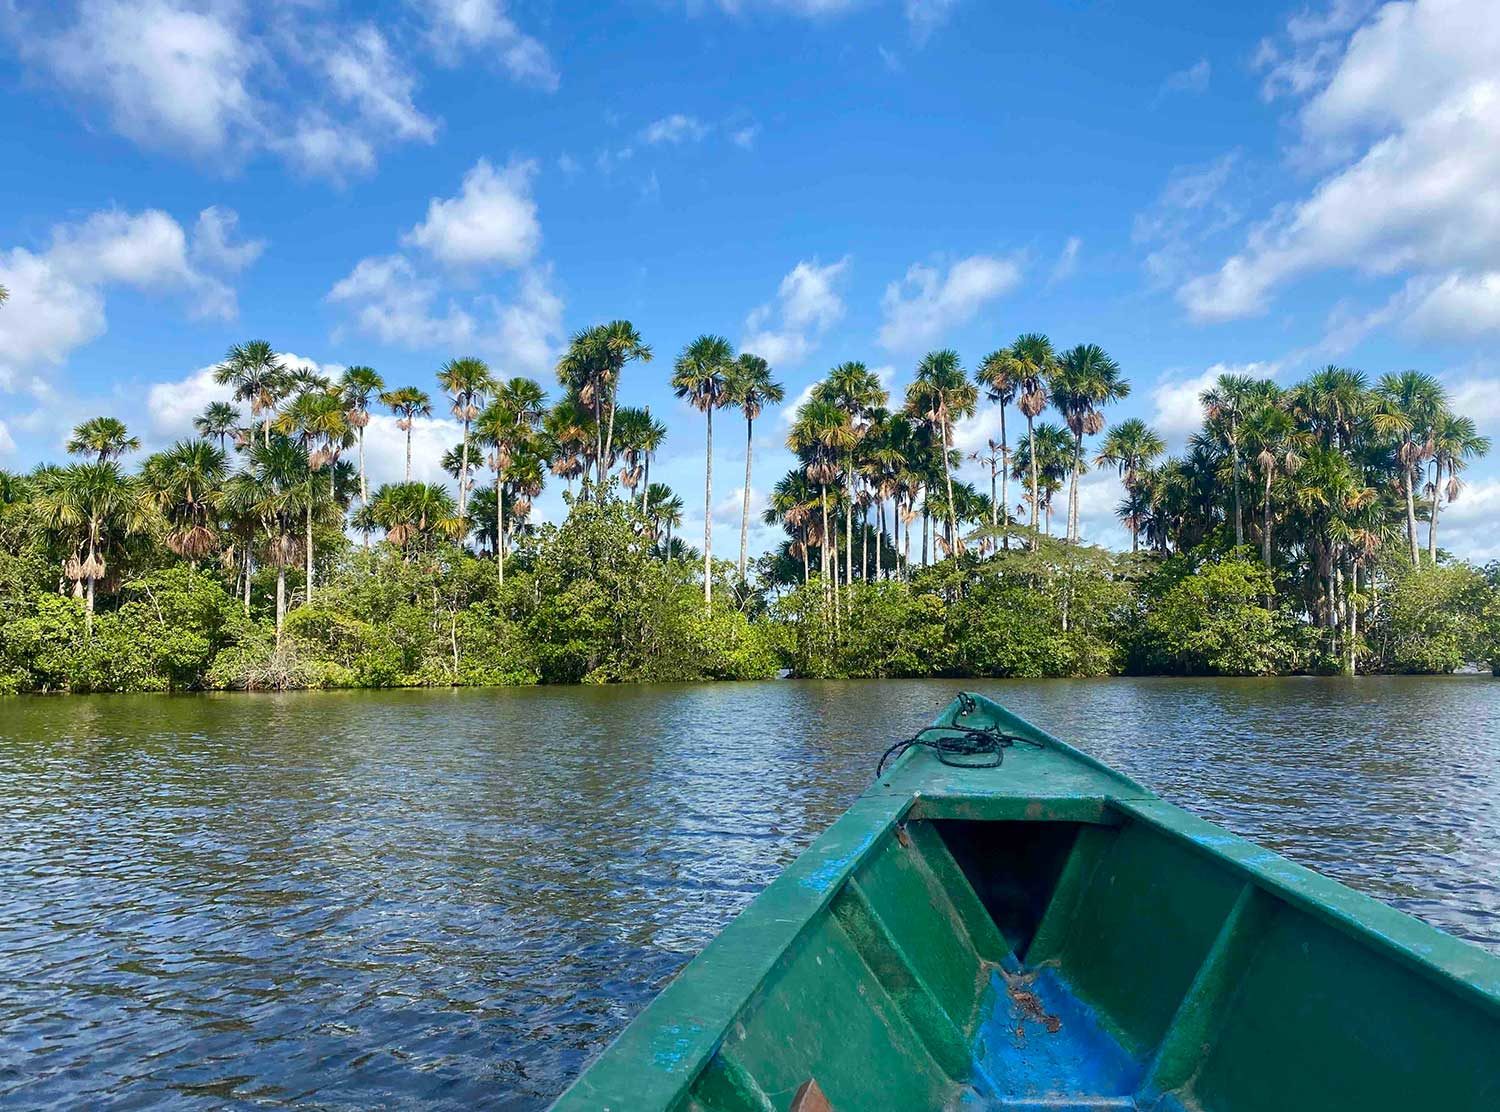 Inkaterra Reserva Amazonica Glide in a canoe across a beautiful mirror-like oxbow lake that is home to the endangered giant river otter, red howler monkeys, caimans, macaws, prehistoric hoatzins, point-tailed palmcreepers, turtles, and more